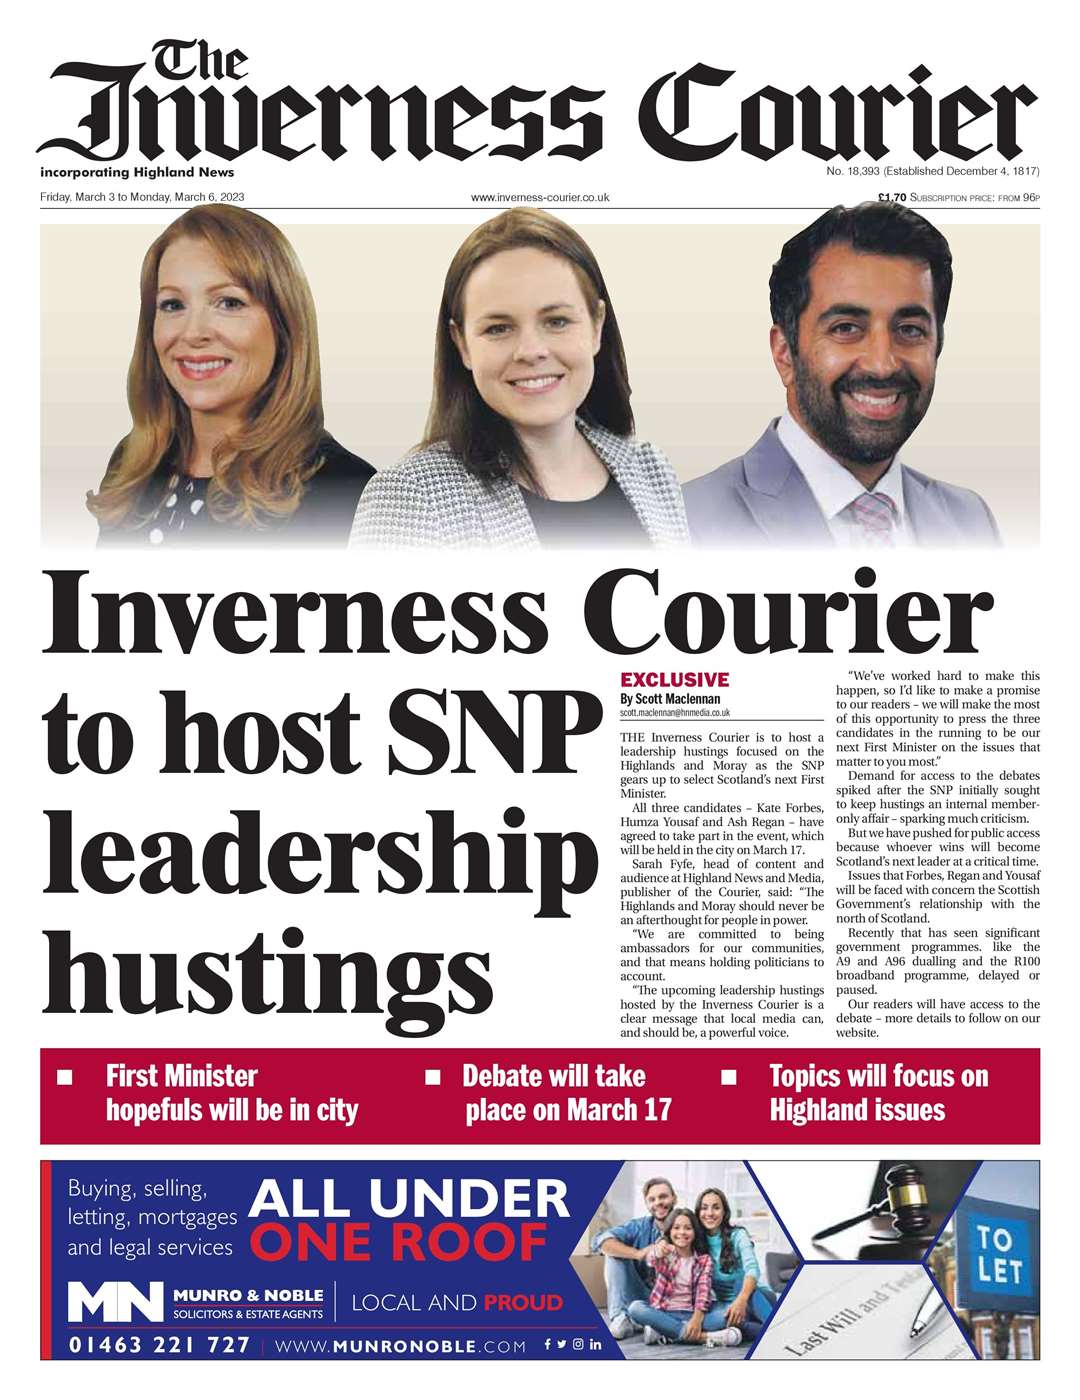 The Inverness Courier, March 3, front page.